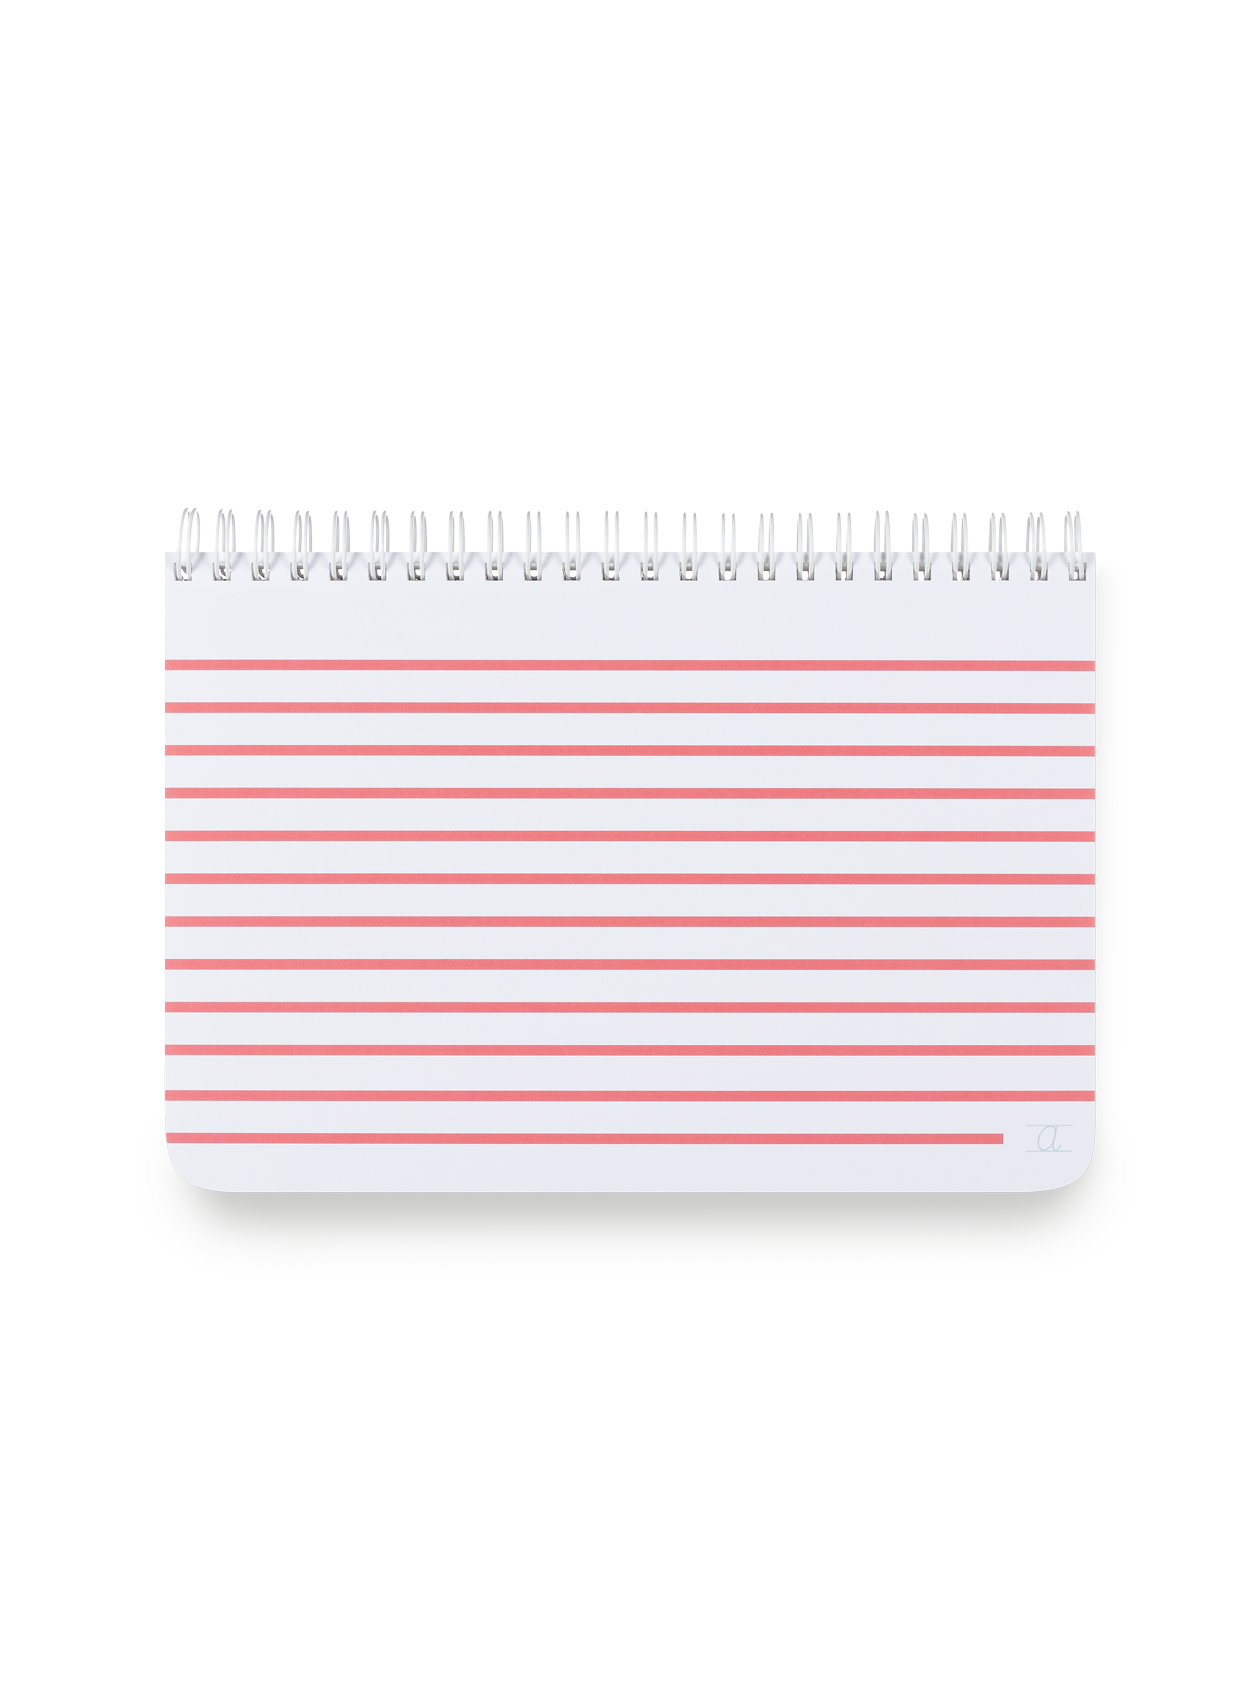 Appointed Kids Spiral Sketchpad in Poppy with white wire-o binding front view II Poppy